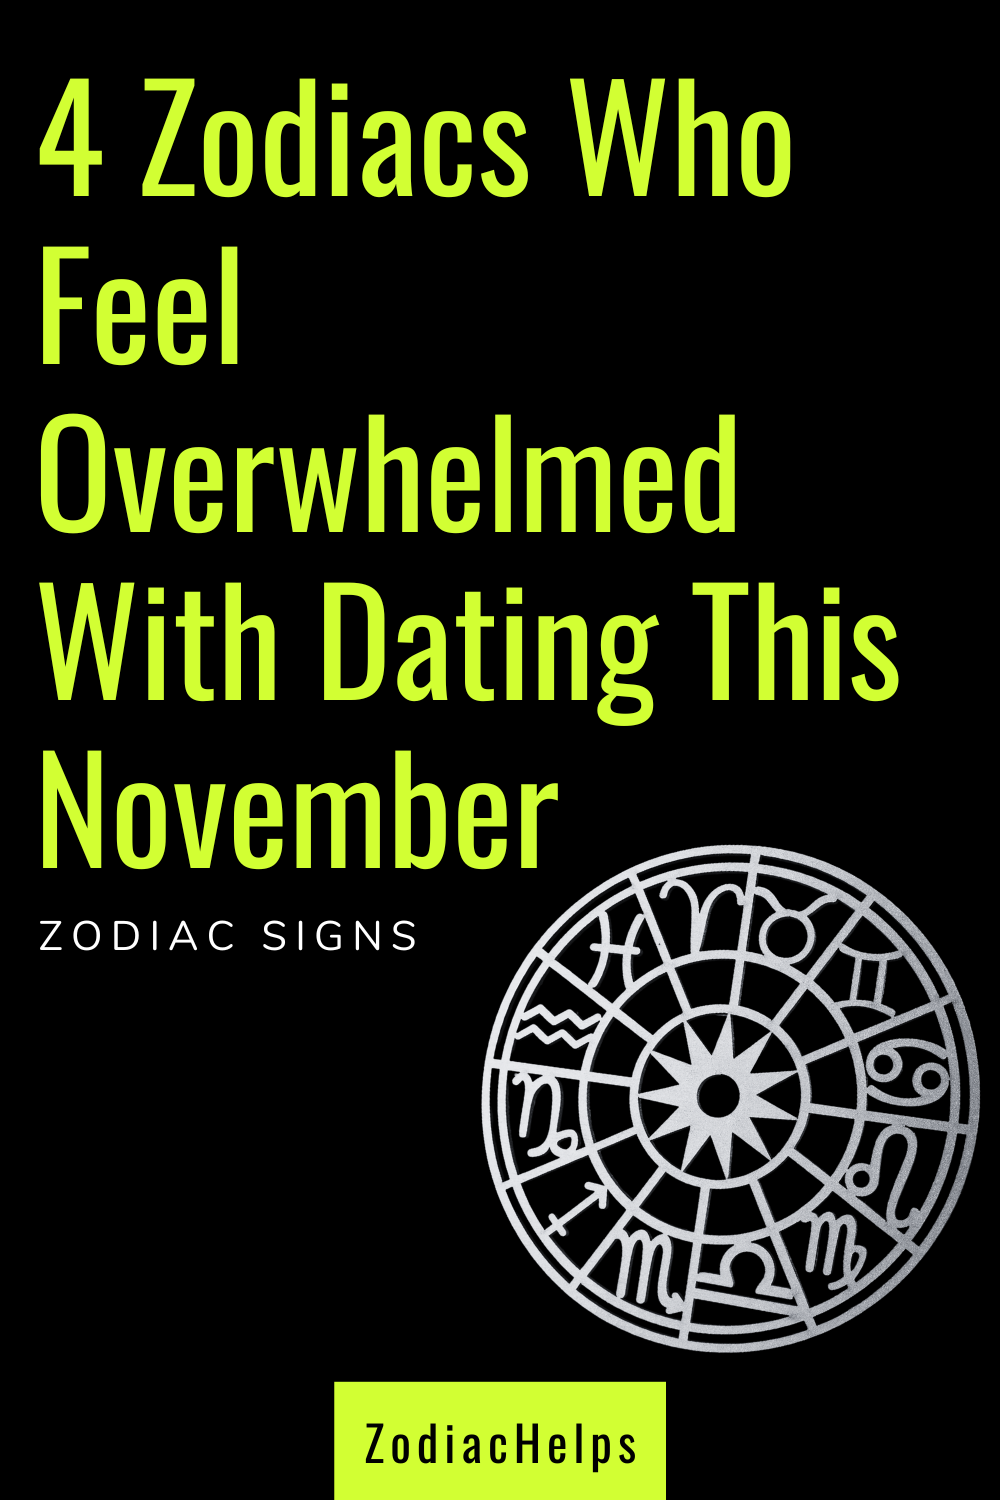 4 Zodiacs Who Feel Overwhelmed With Dating This November